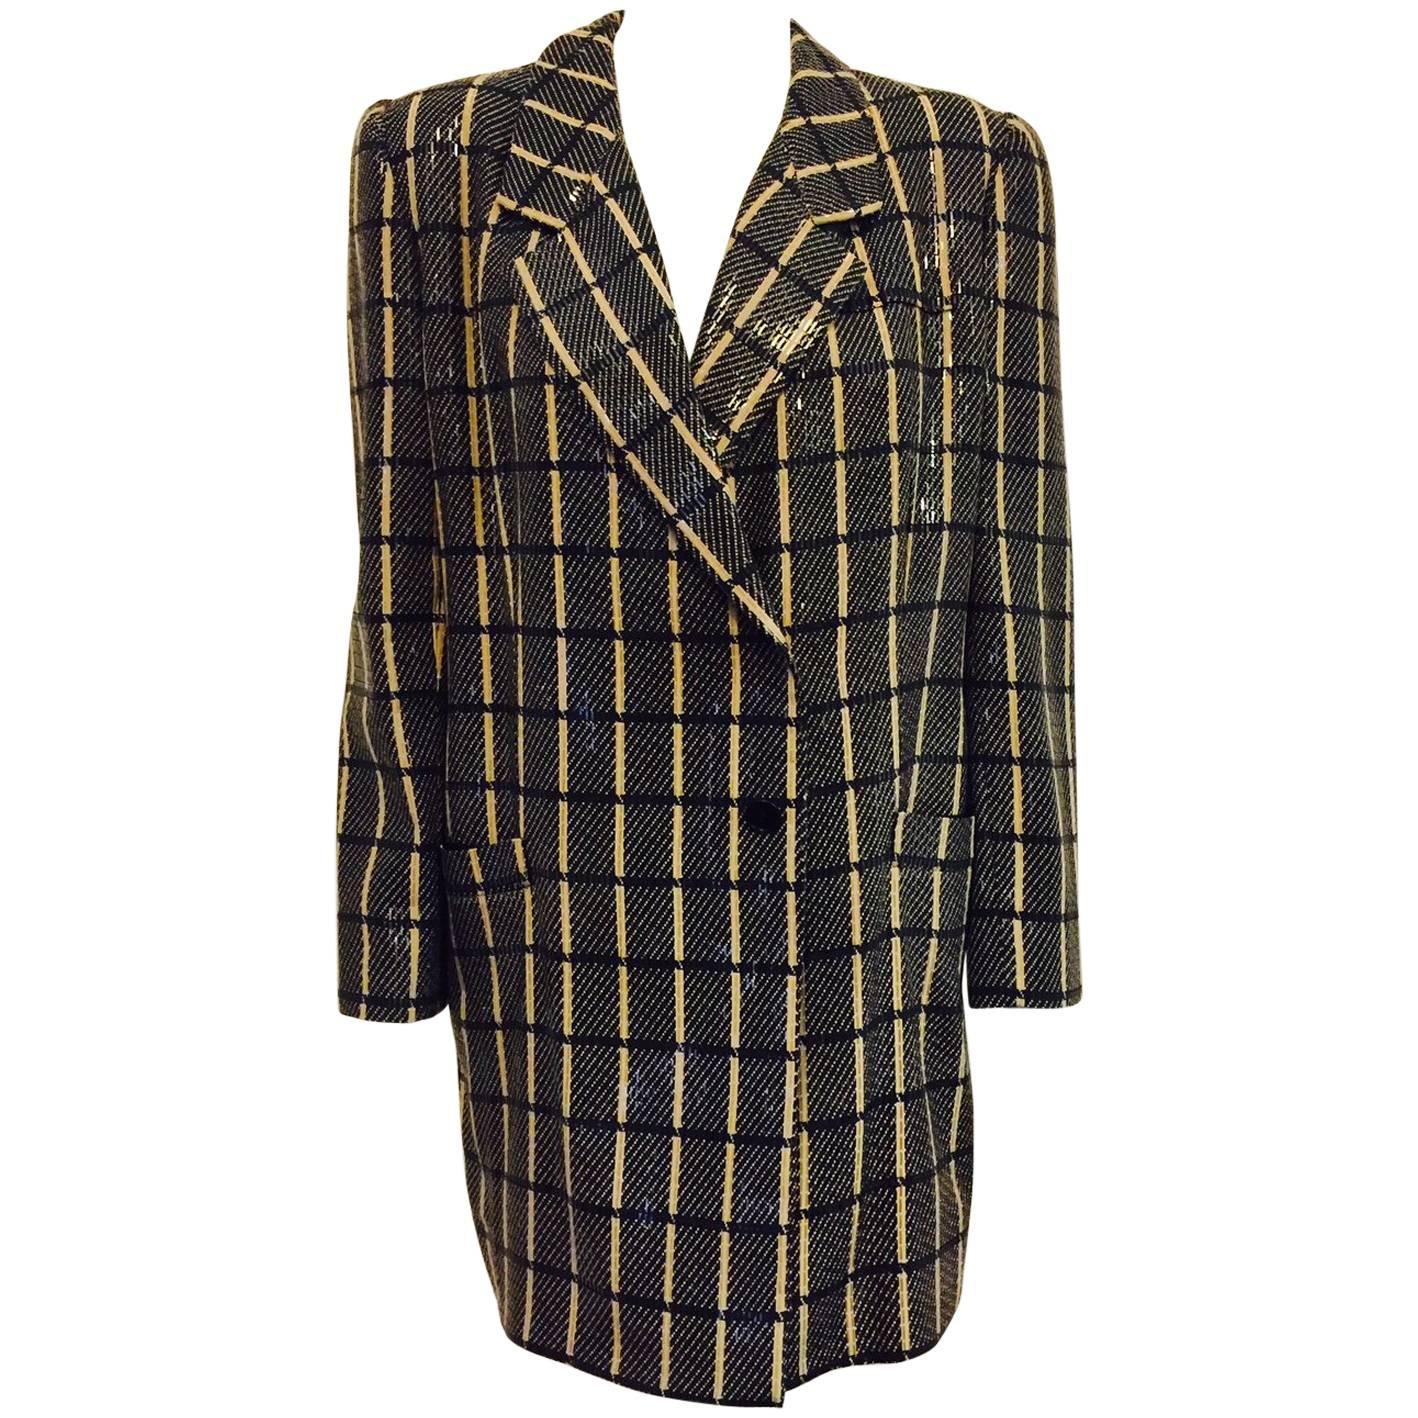 Giorgio Armani Black and Tan Window Pane Evening Jacket With Rectangular Sequins For Sale